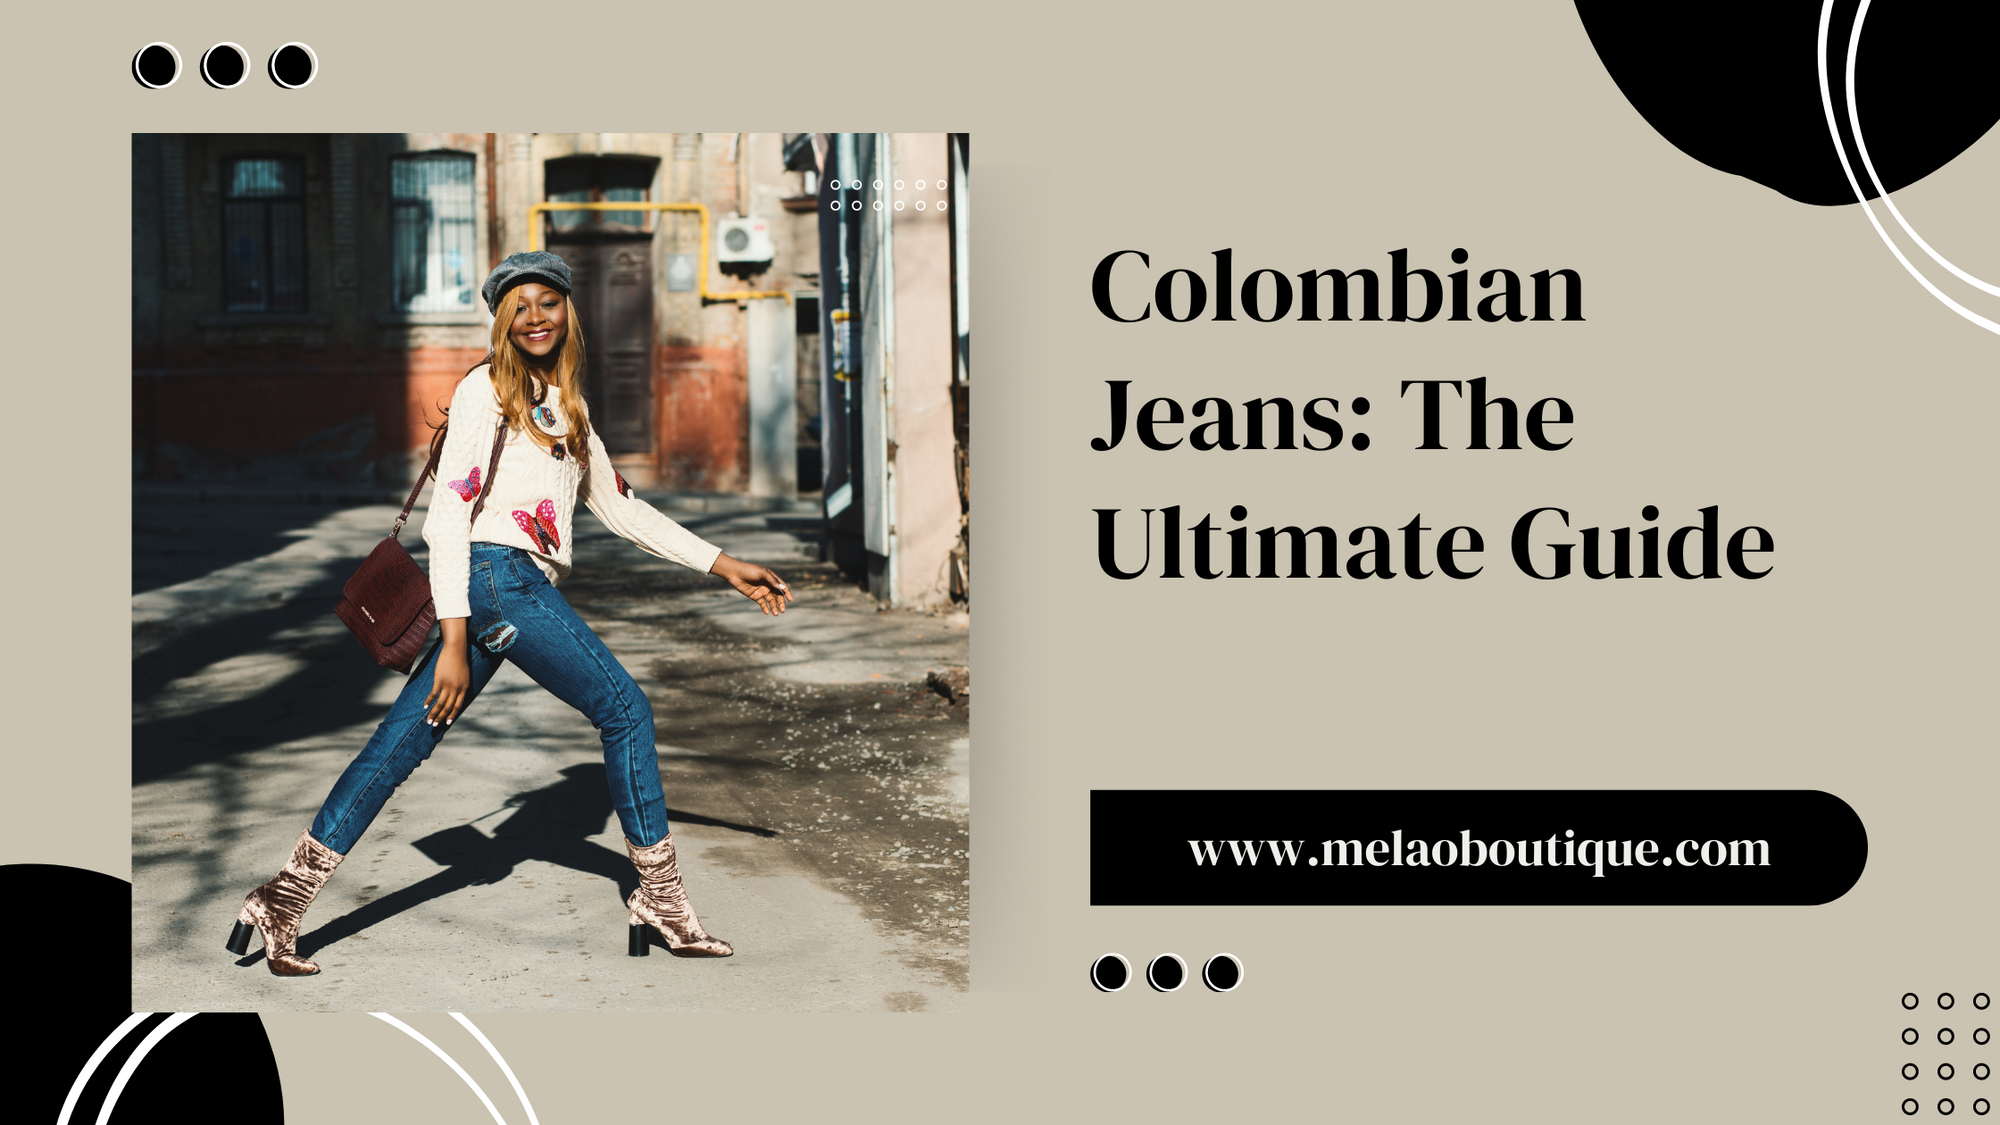 Colombian Jeans The Ultimate Guide